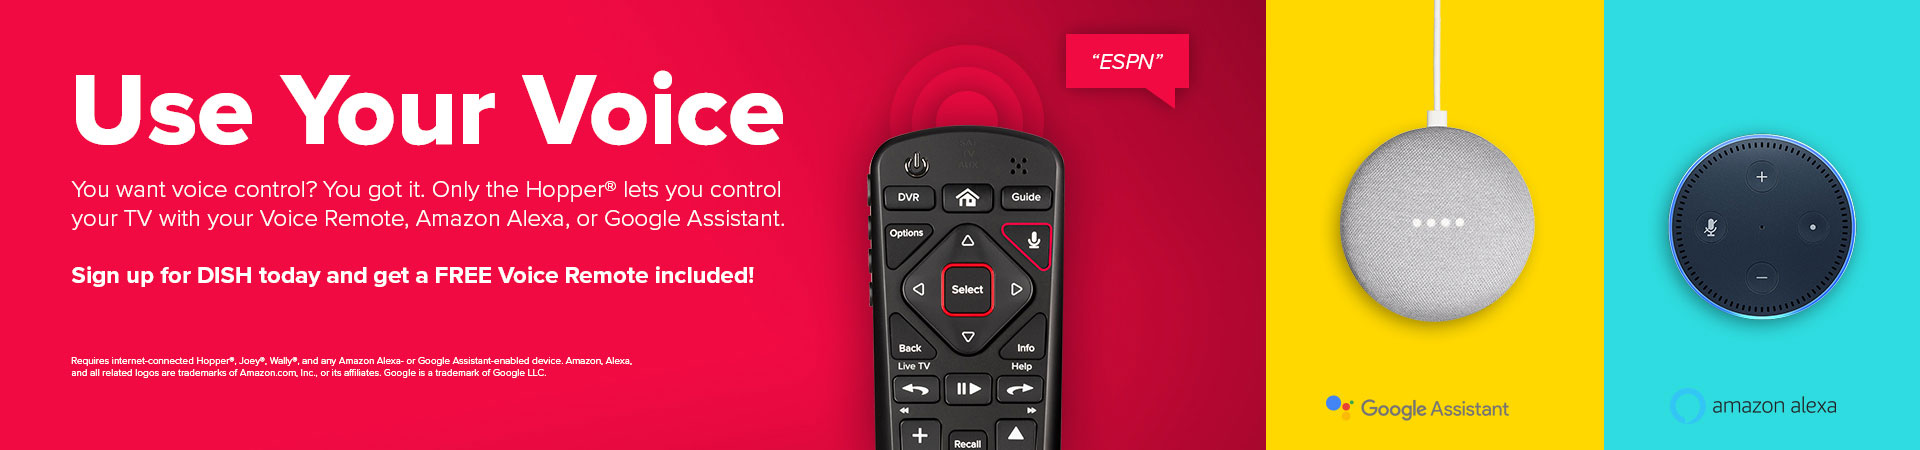 Dish Voice Remote with Google and Alexa | Dish Network Remote